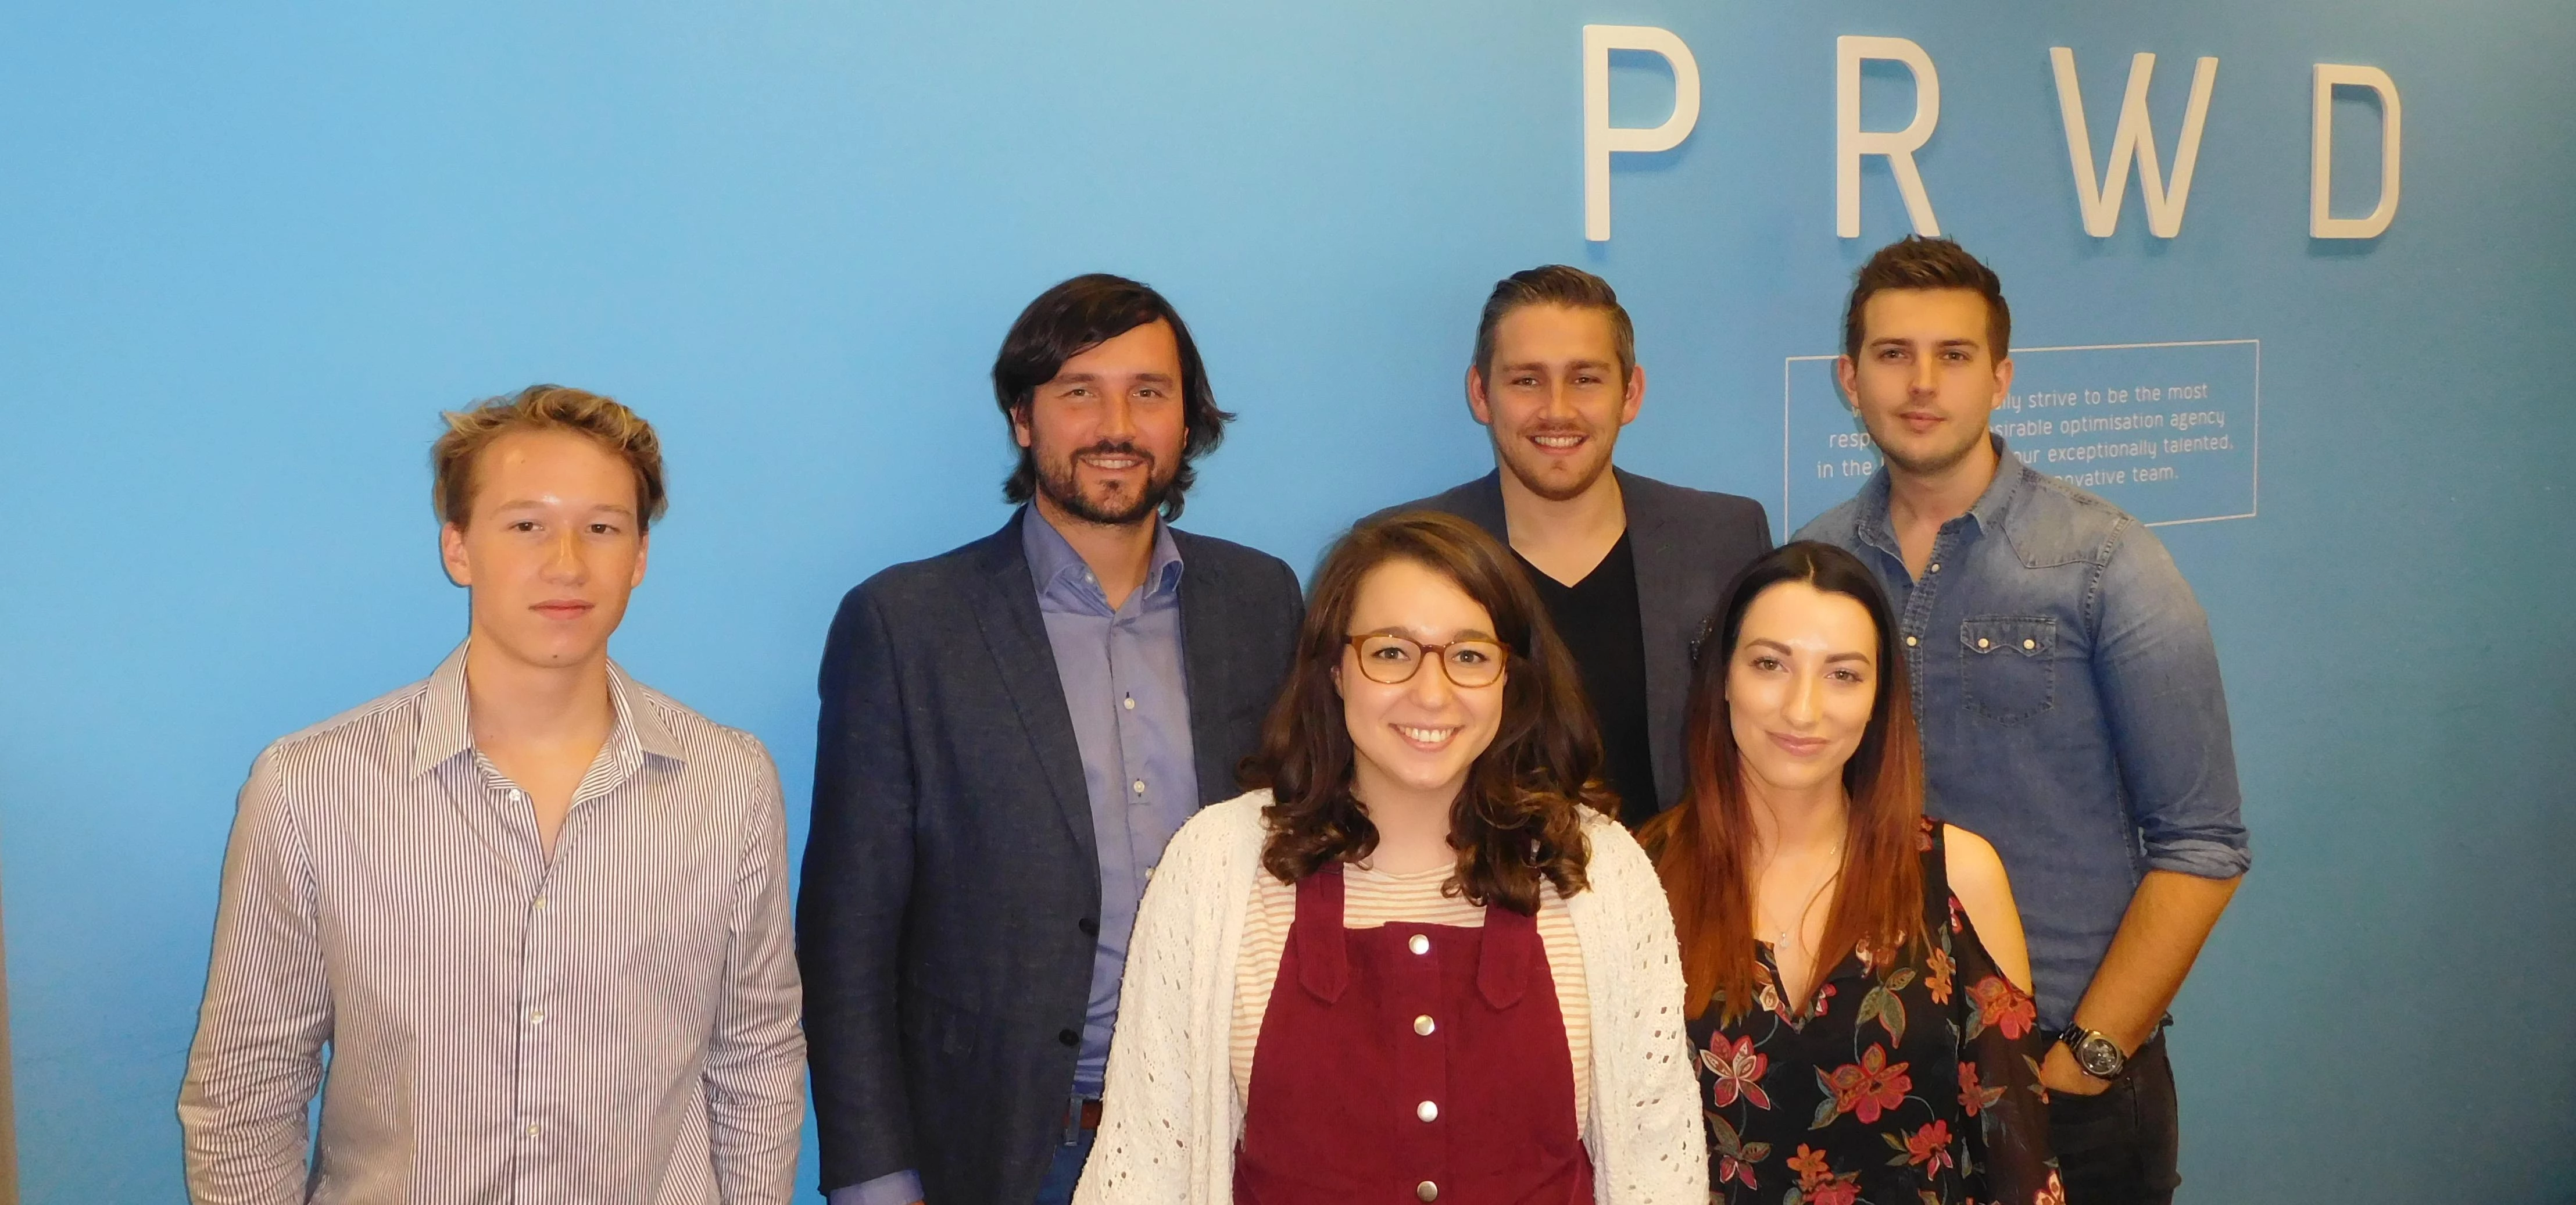 Four new hires at PRWD